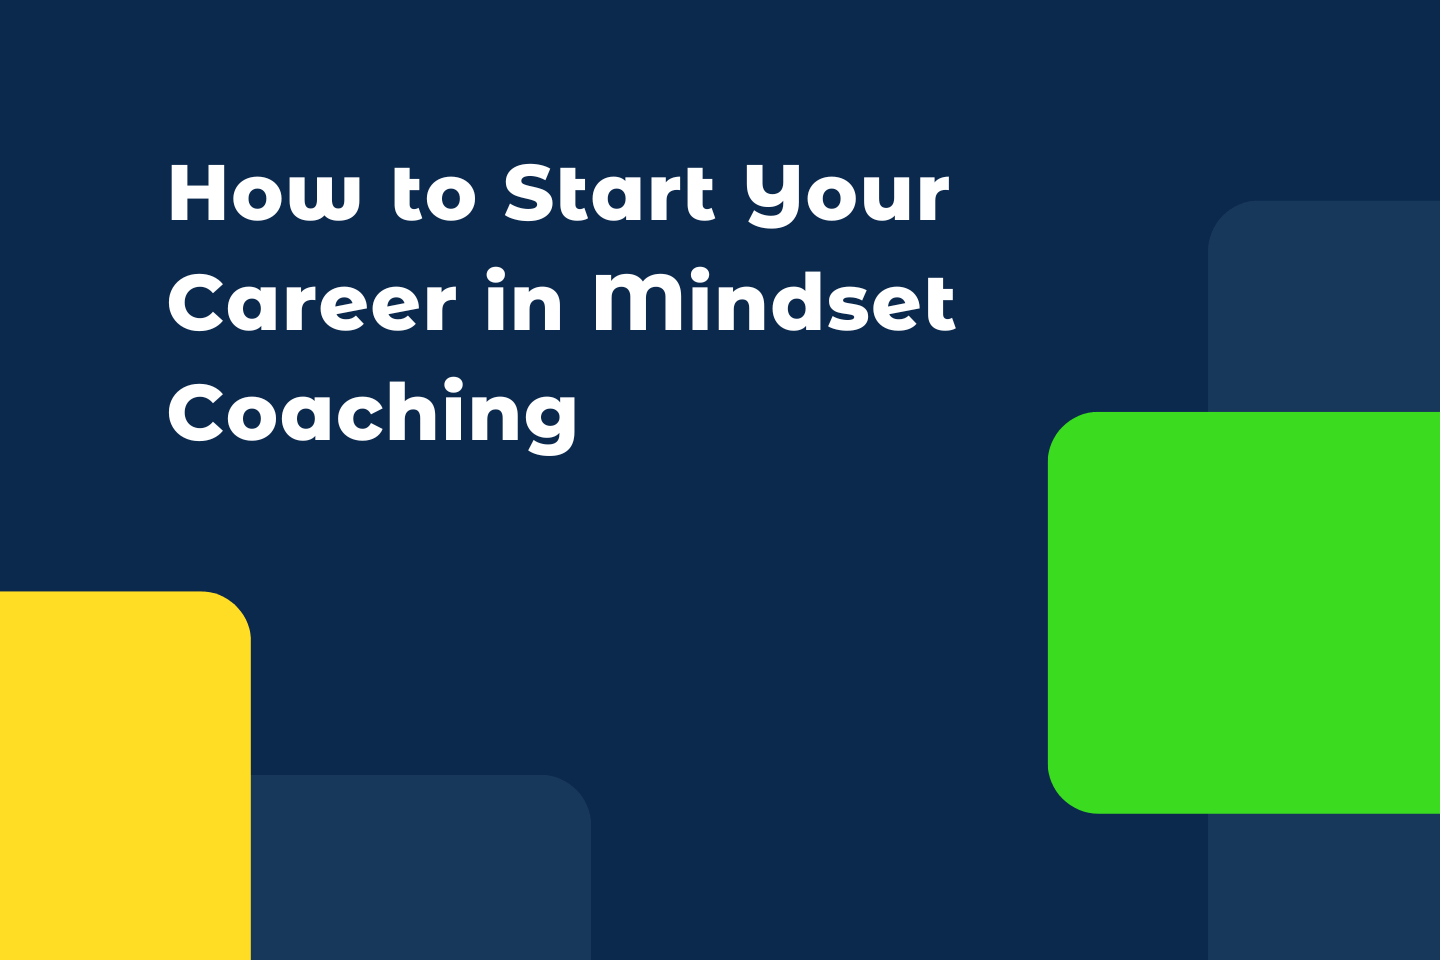 How to Start Your Career in Mindset Coaching